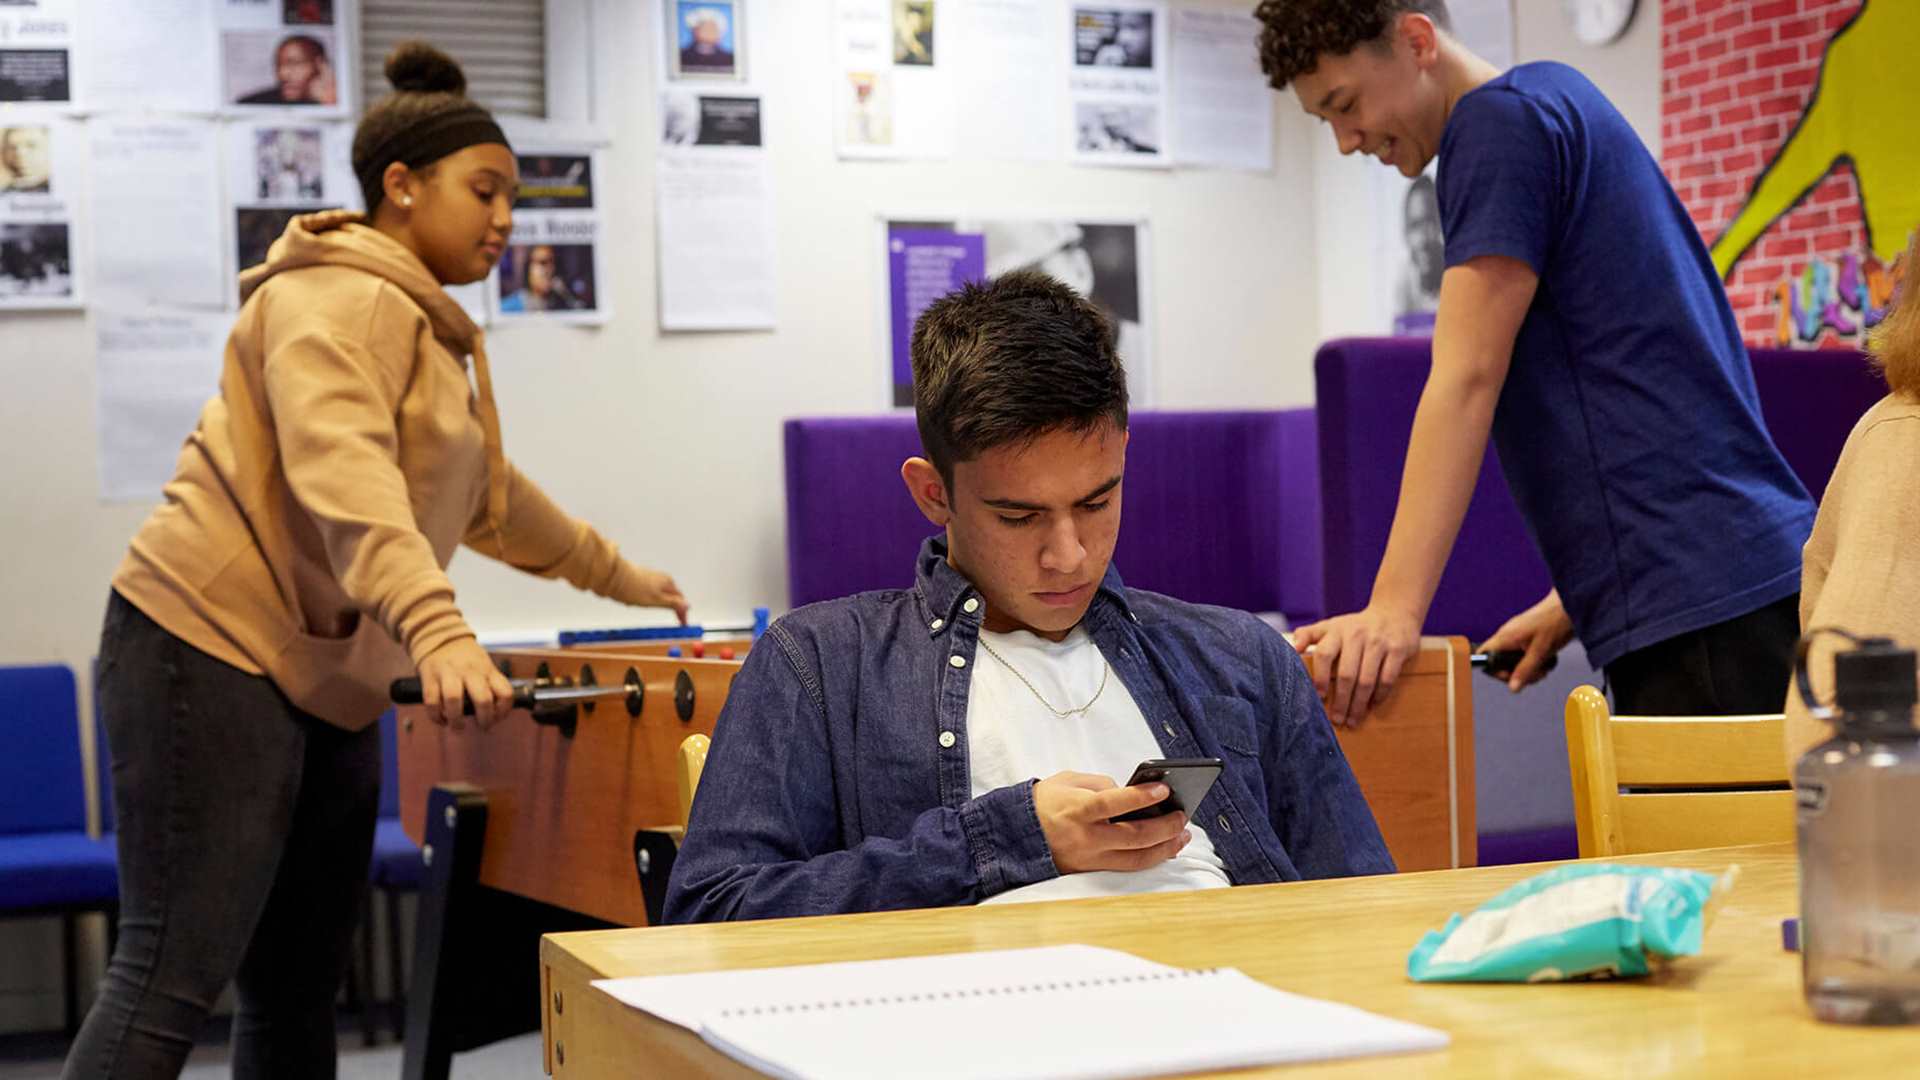 A young person is looking down at his phone at a table in a common room. There are two young people behind him playing table football.